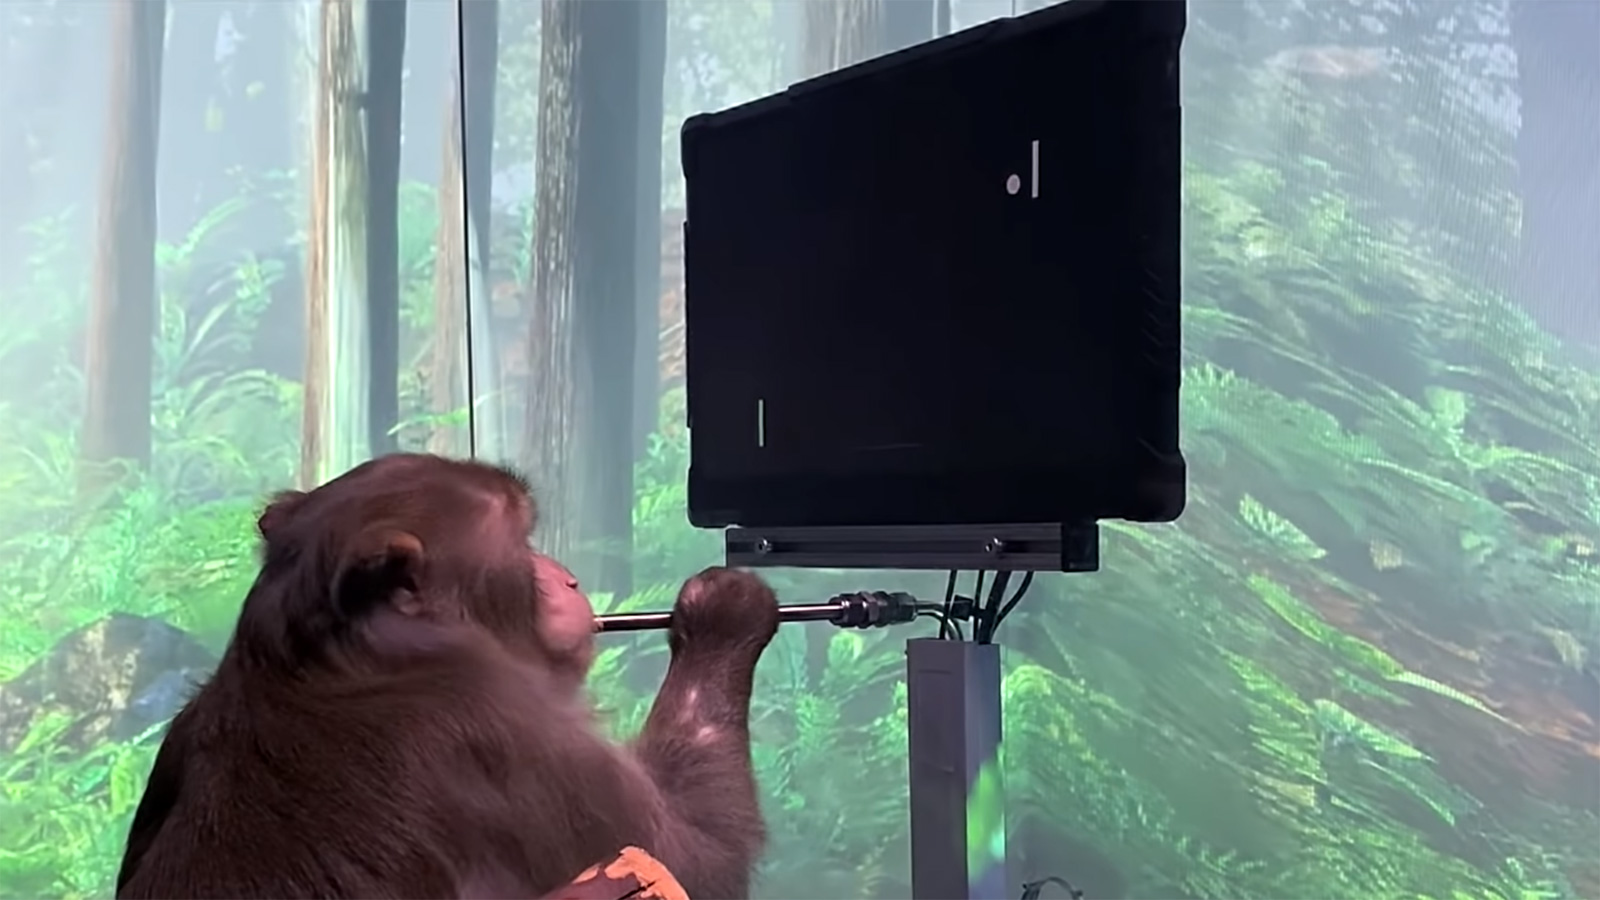 watch-monkey-uses-elon-musk-s-neuralink-to-play-pong-with-its-mind